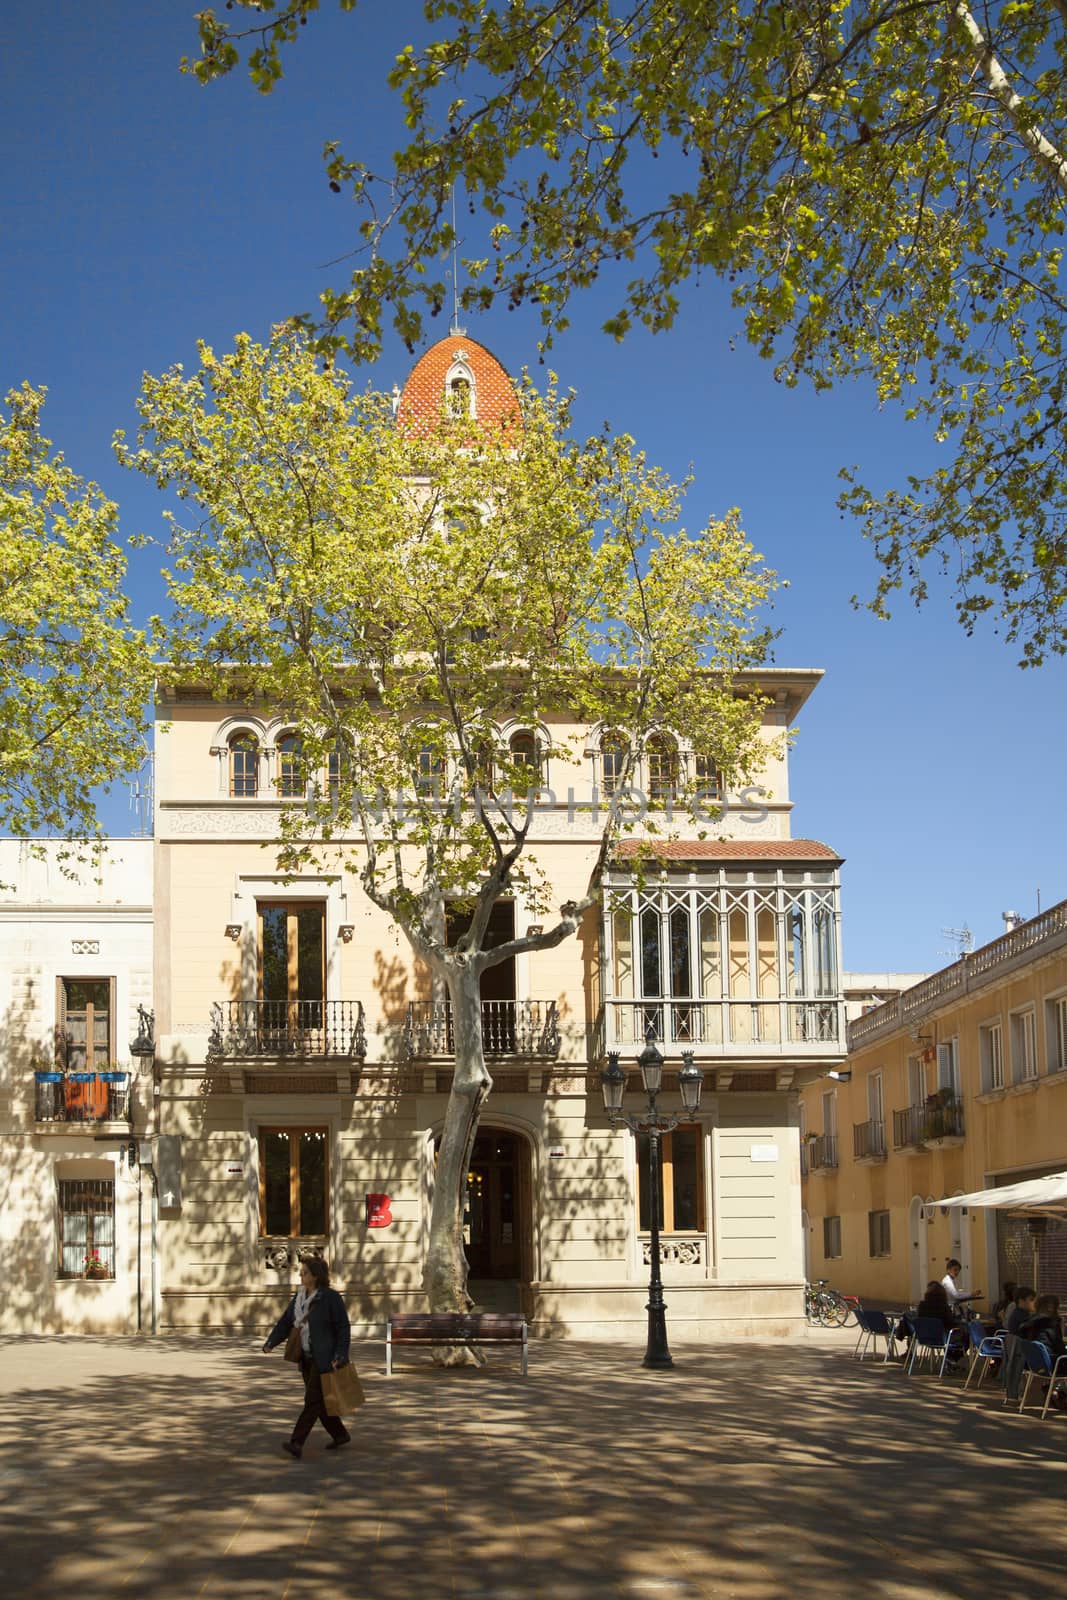 Barcelona, Spain - 9 April 2015: Centre Civic Can Deu in Les Corts neighborhood